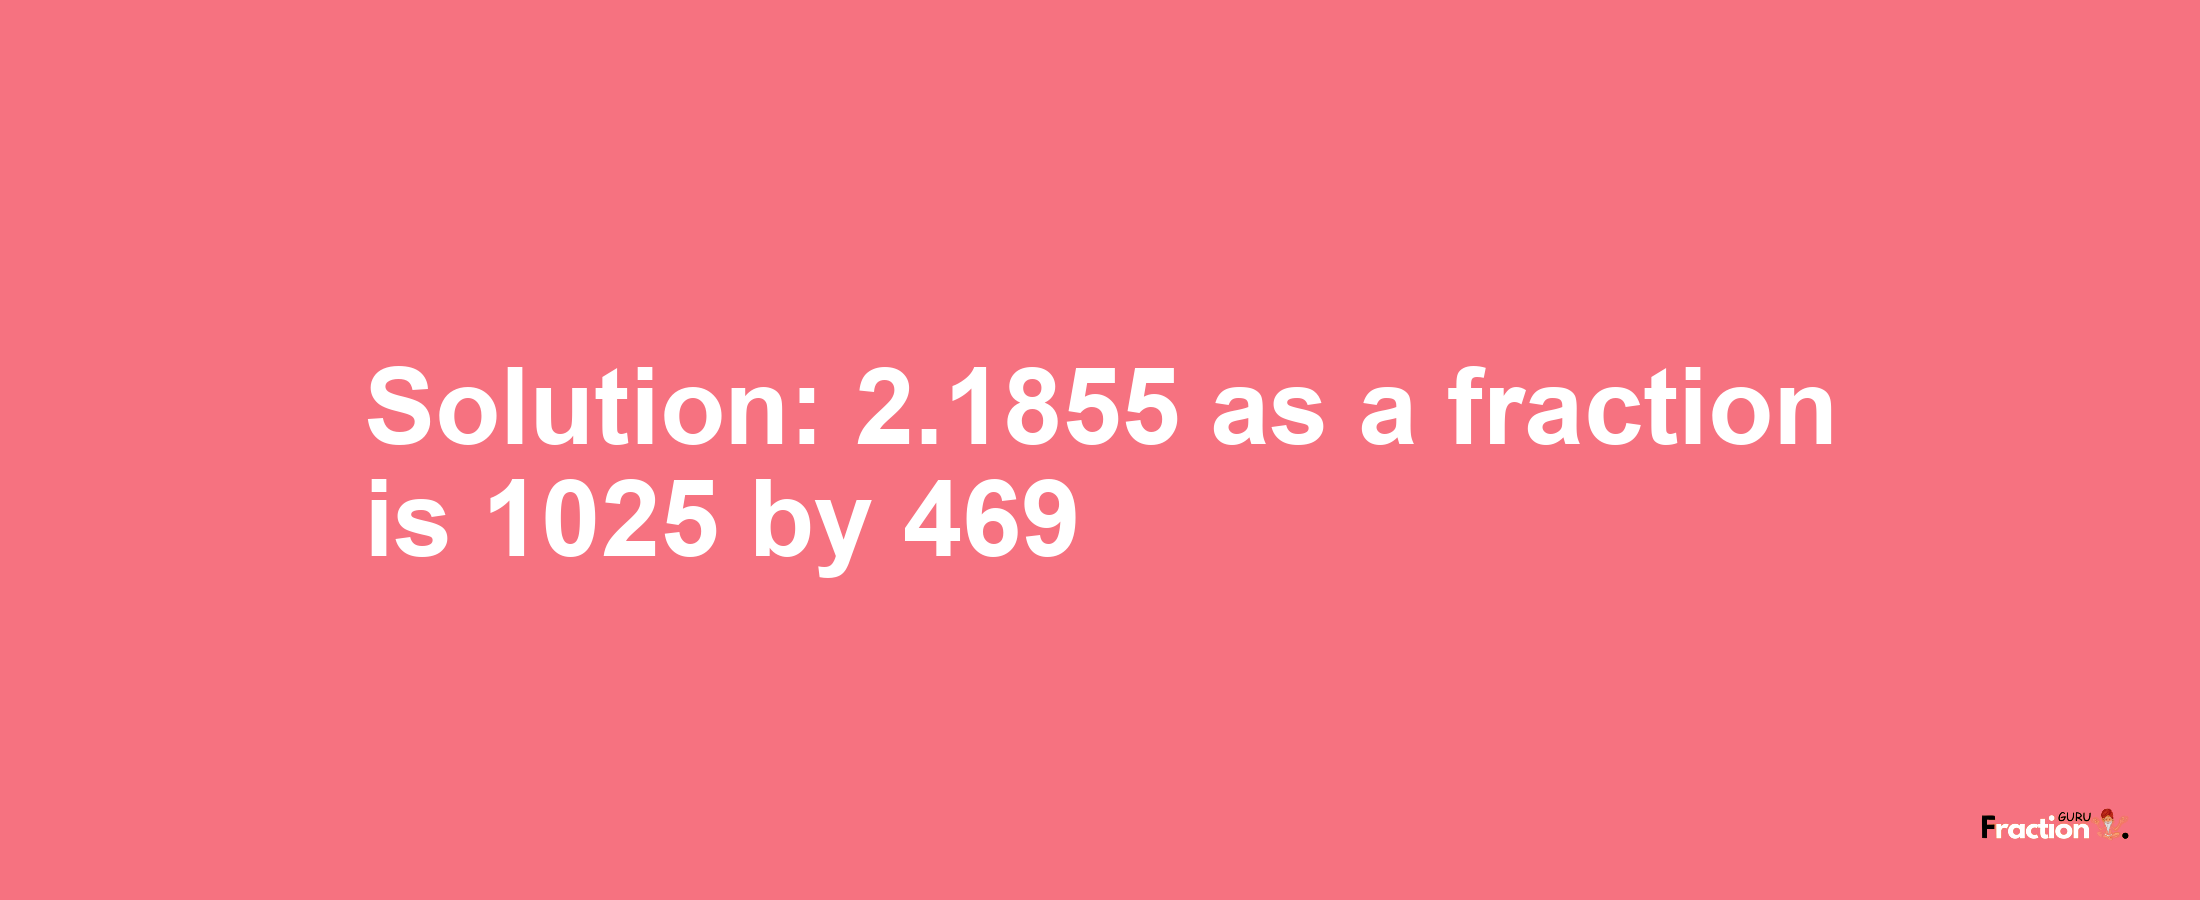 Solution:2.1855 as a fraction is 1025/469